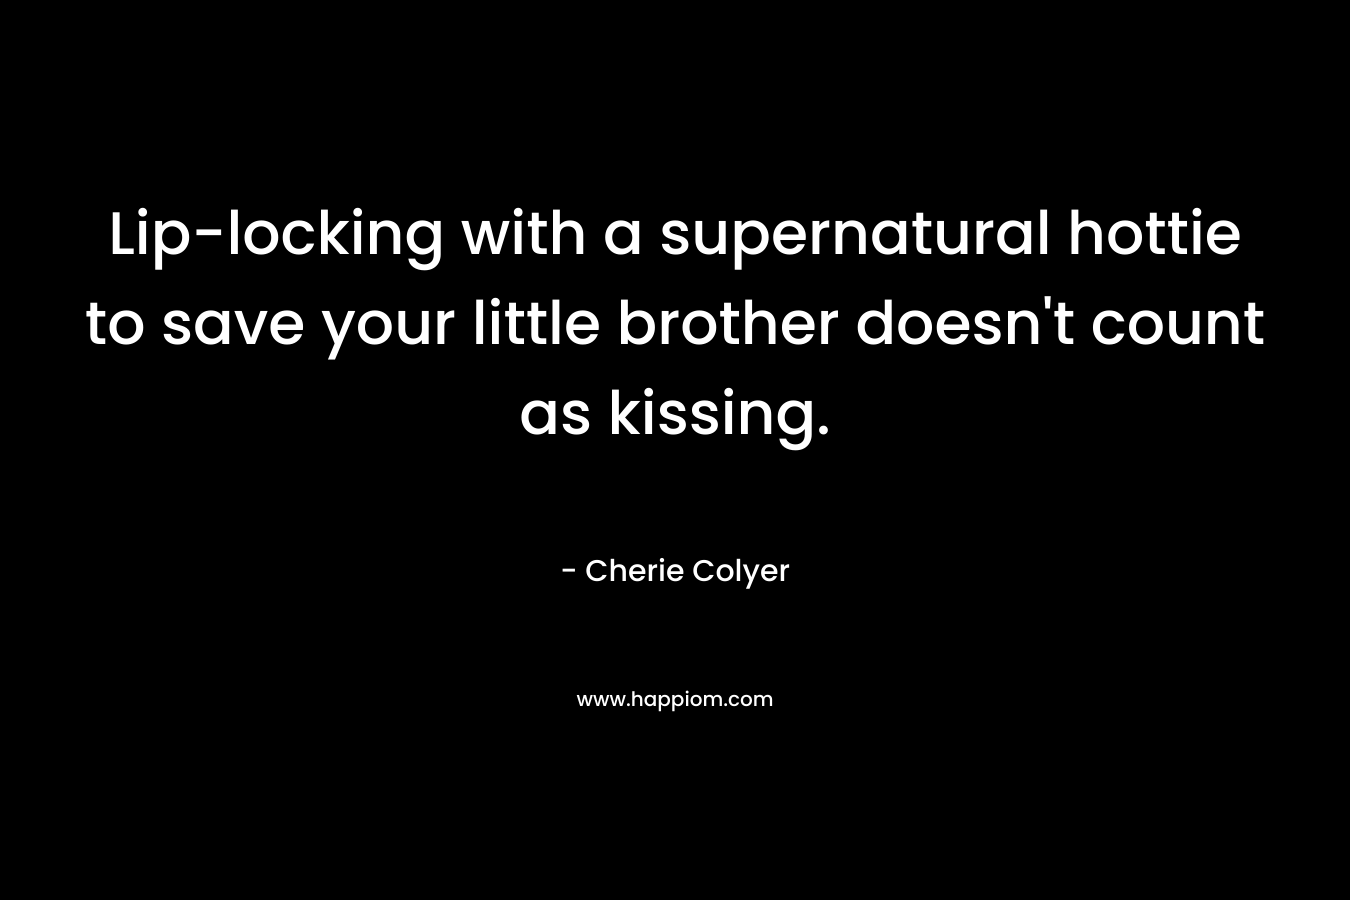 Lip-locking with a supernatural hottie to save your little brother doesn't count as kissing.